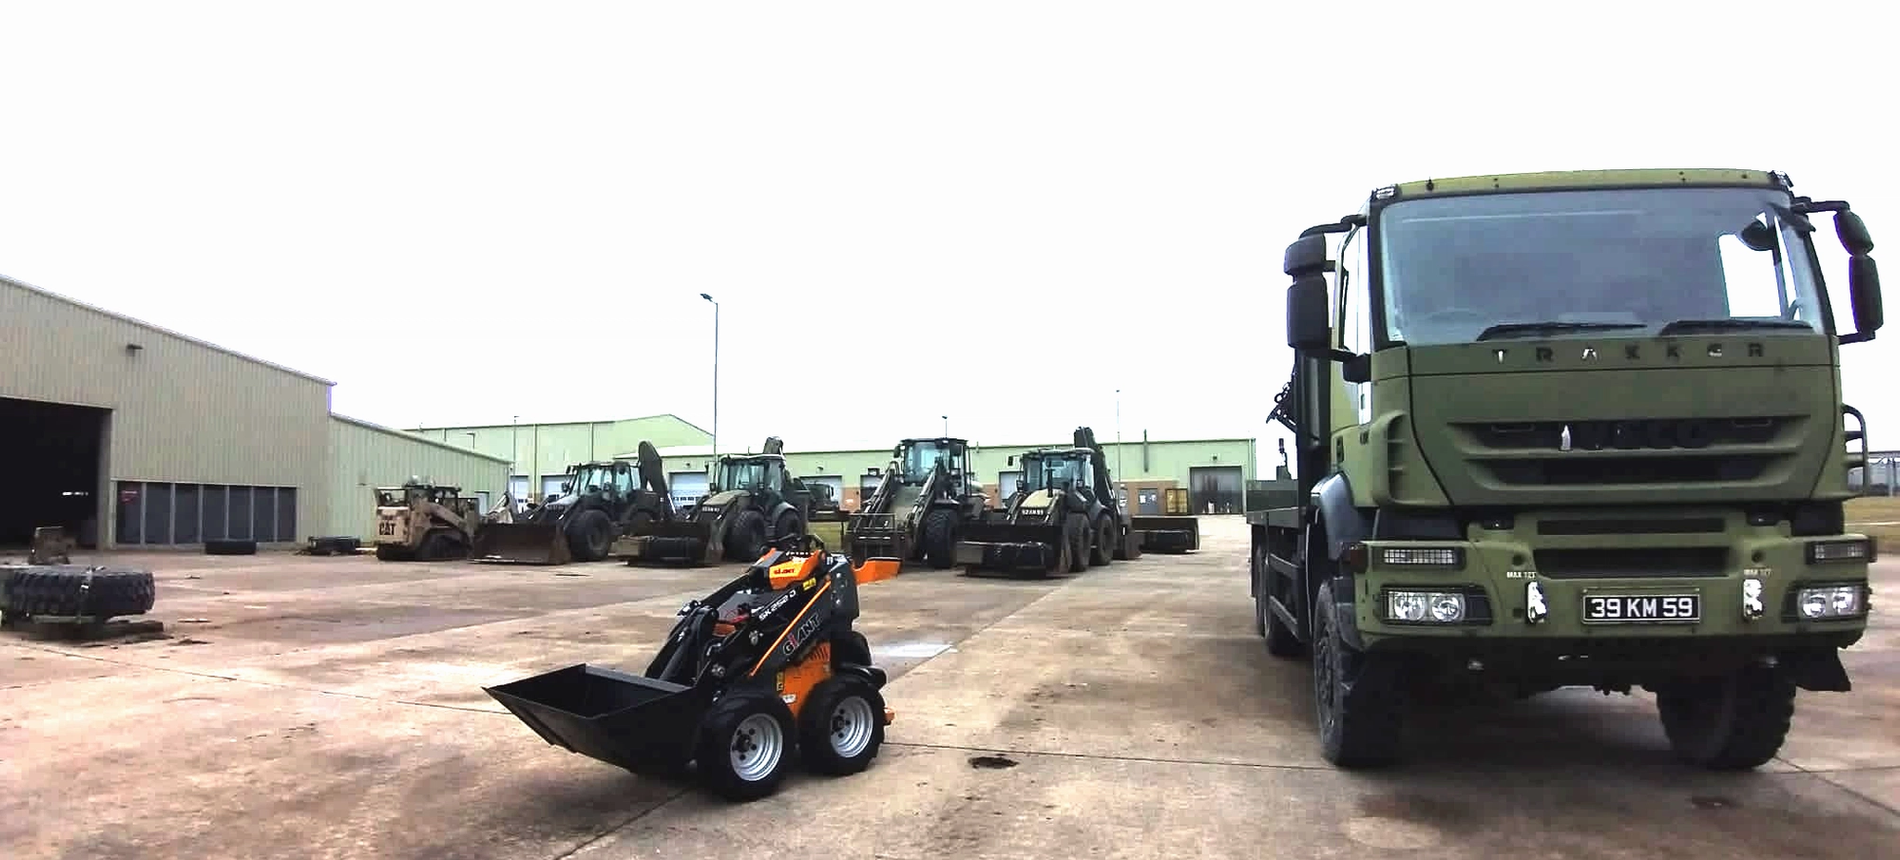 Skid Steer Delivered to the British Army.